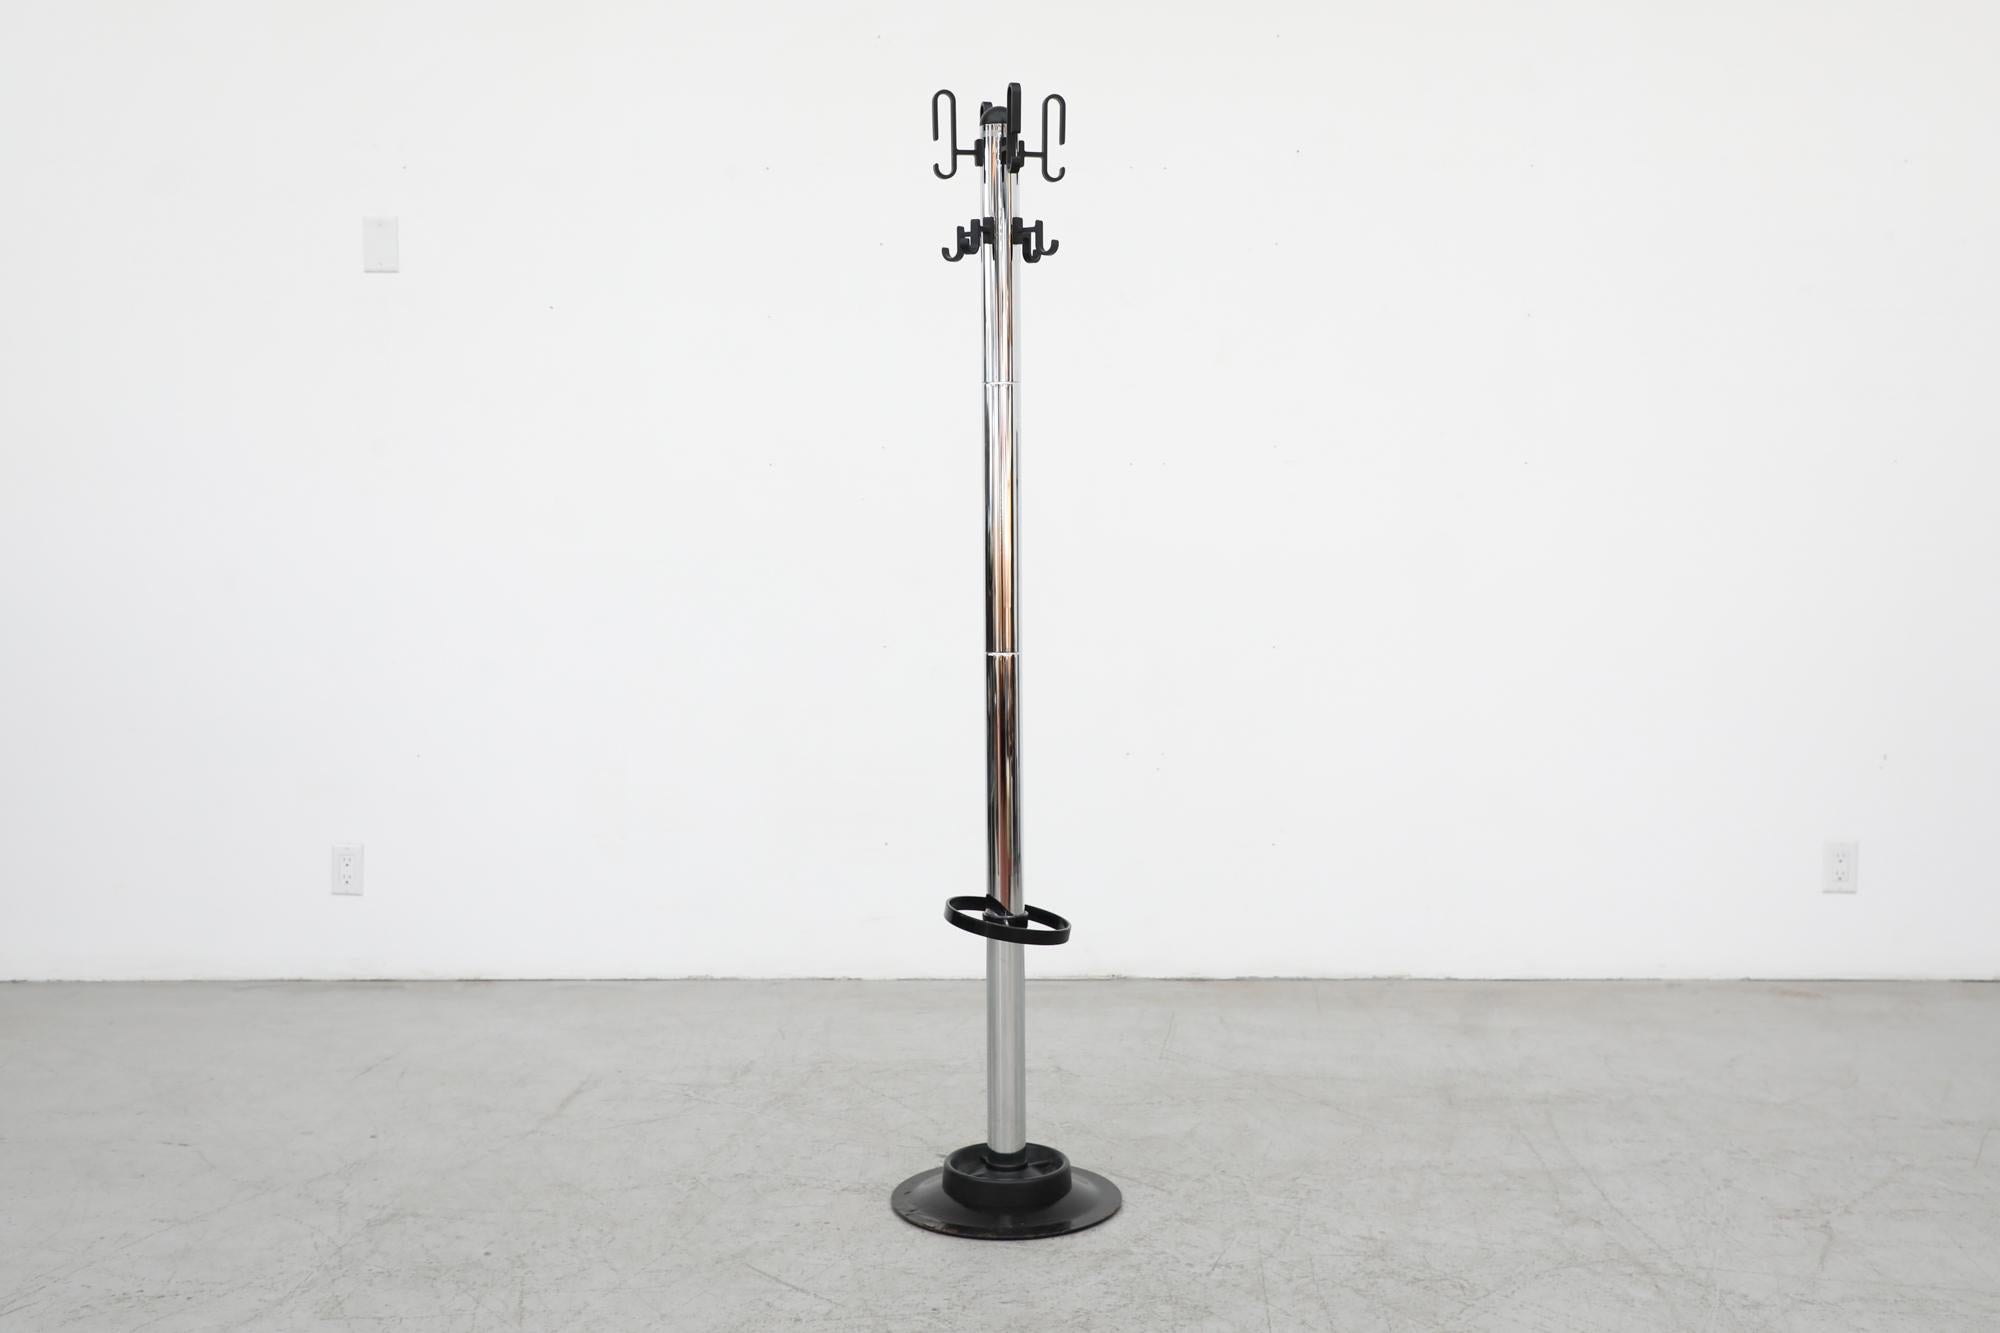 1970's Rosconi chrome standing coat rack with plastic hooks, plastic umbrella holder and metal base. In original condition with visible wear, including warping of umbrella holder and light scratches. Wear is consistent their age and use.